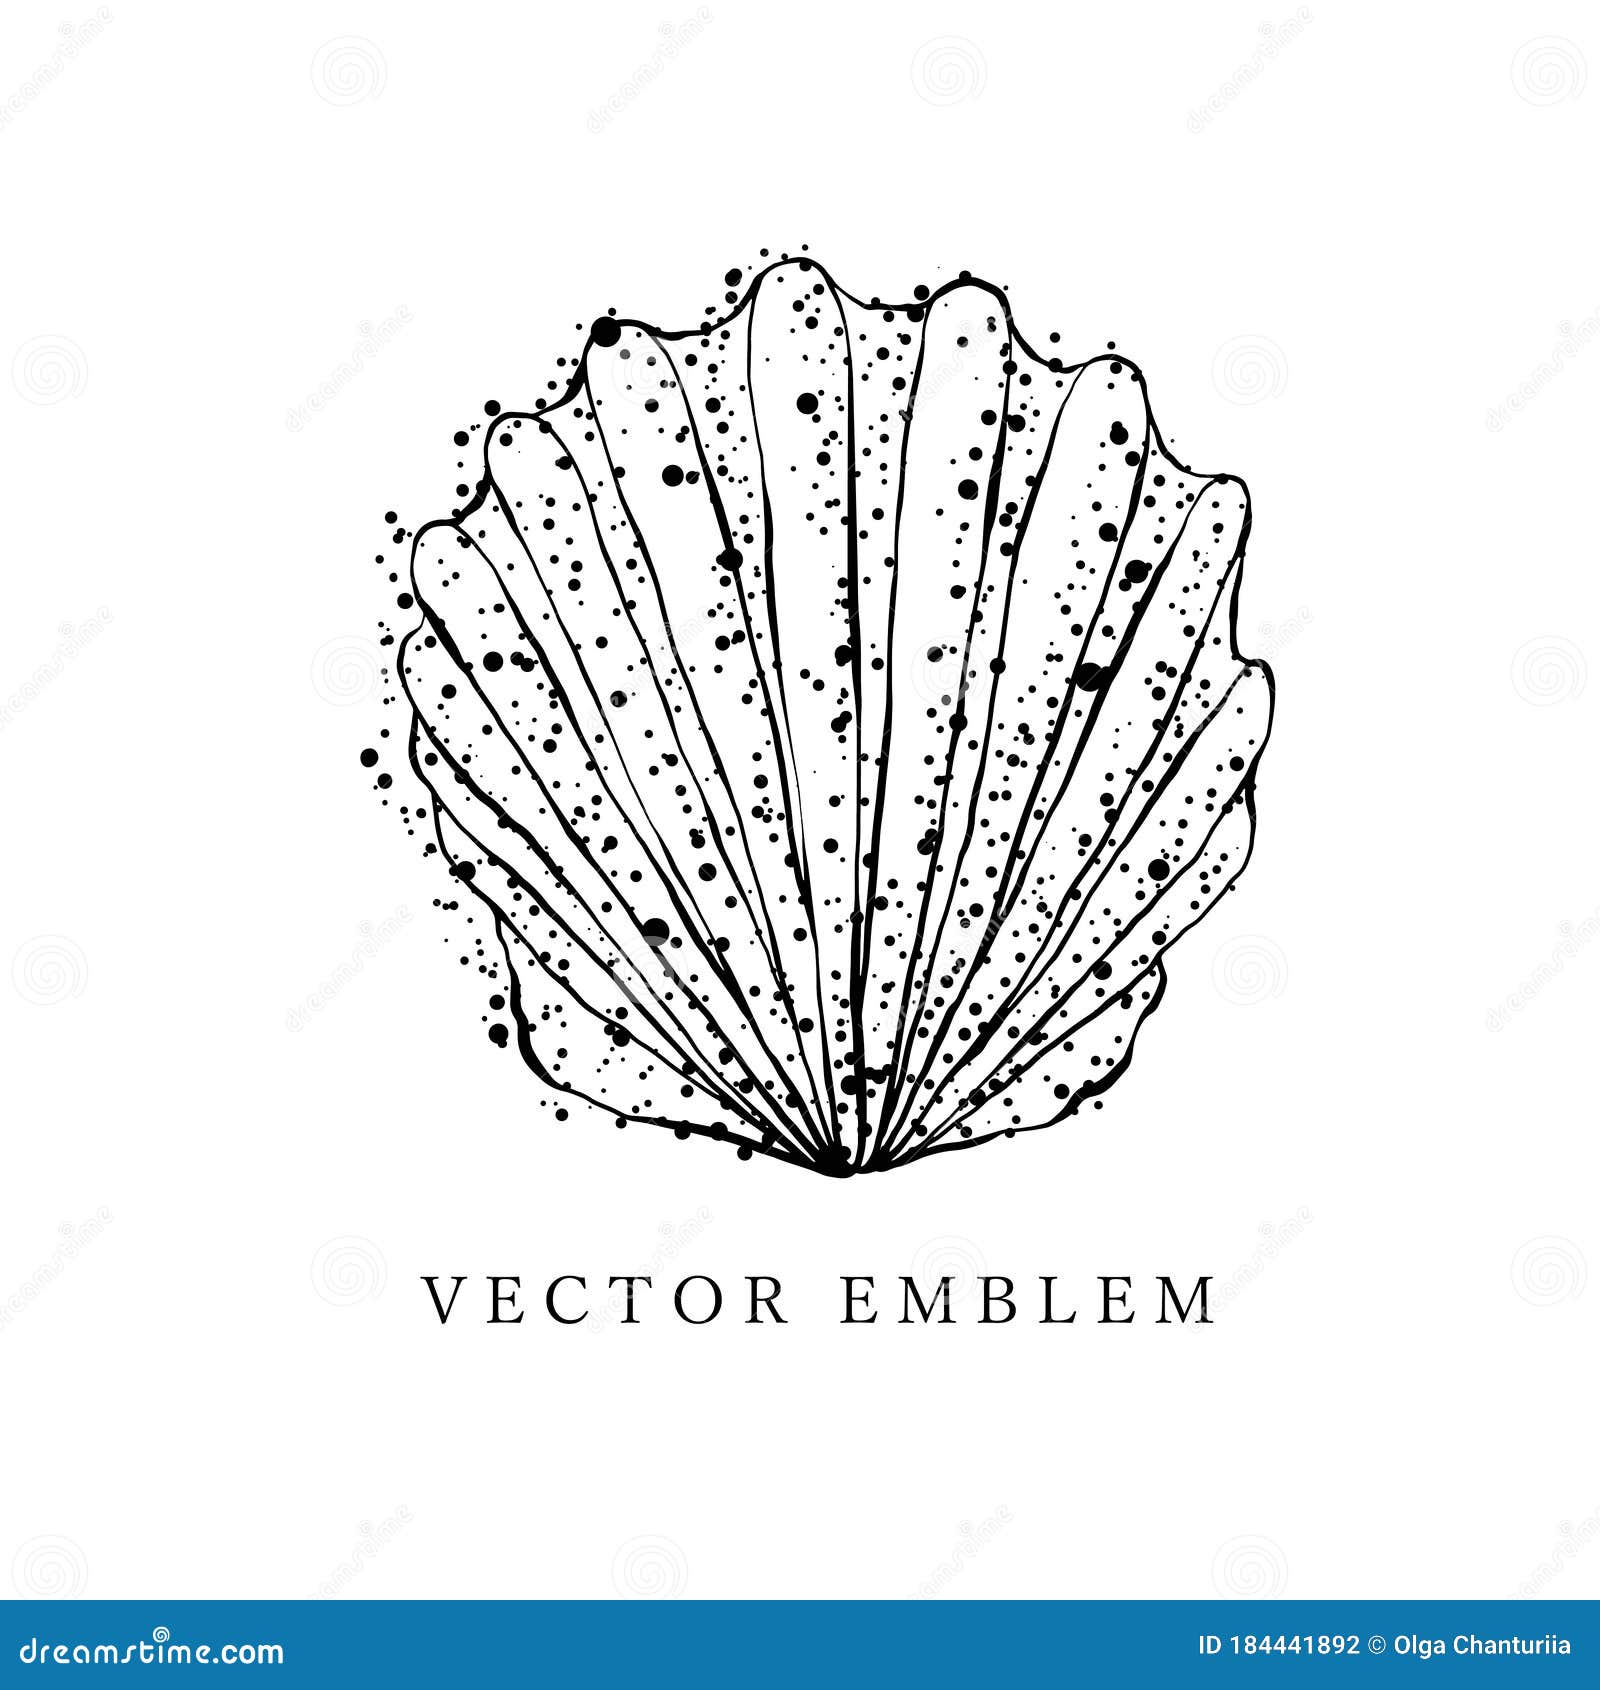 Hand Drawn Black Contour Seashell. Outline, Cartoon, Tattoo Design with  Dots, Spray Texture. Stock Vector - Illustration of silhouette, shell:  184441892